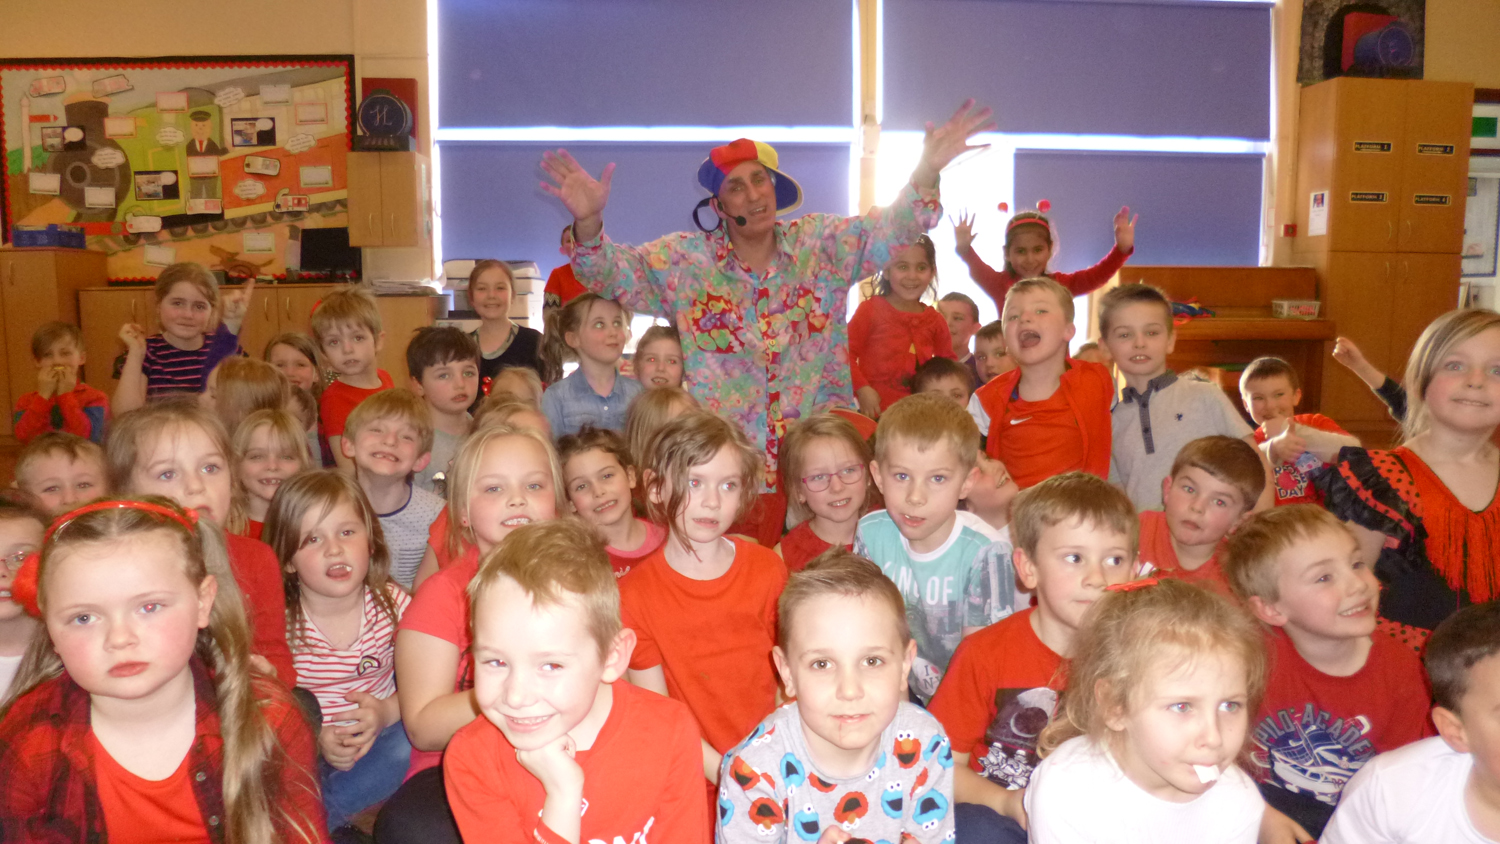 £377 Raised for Comic Relief